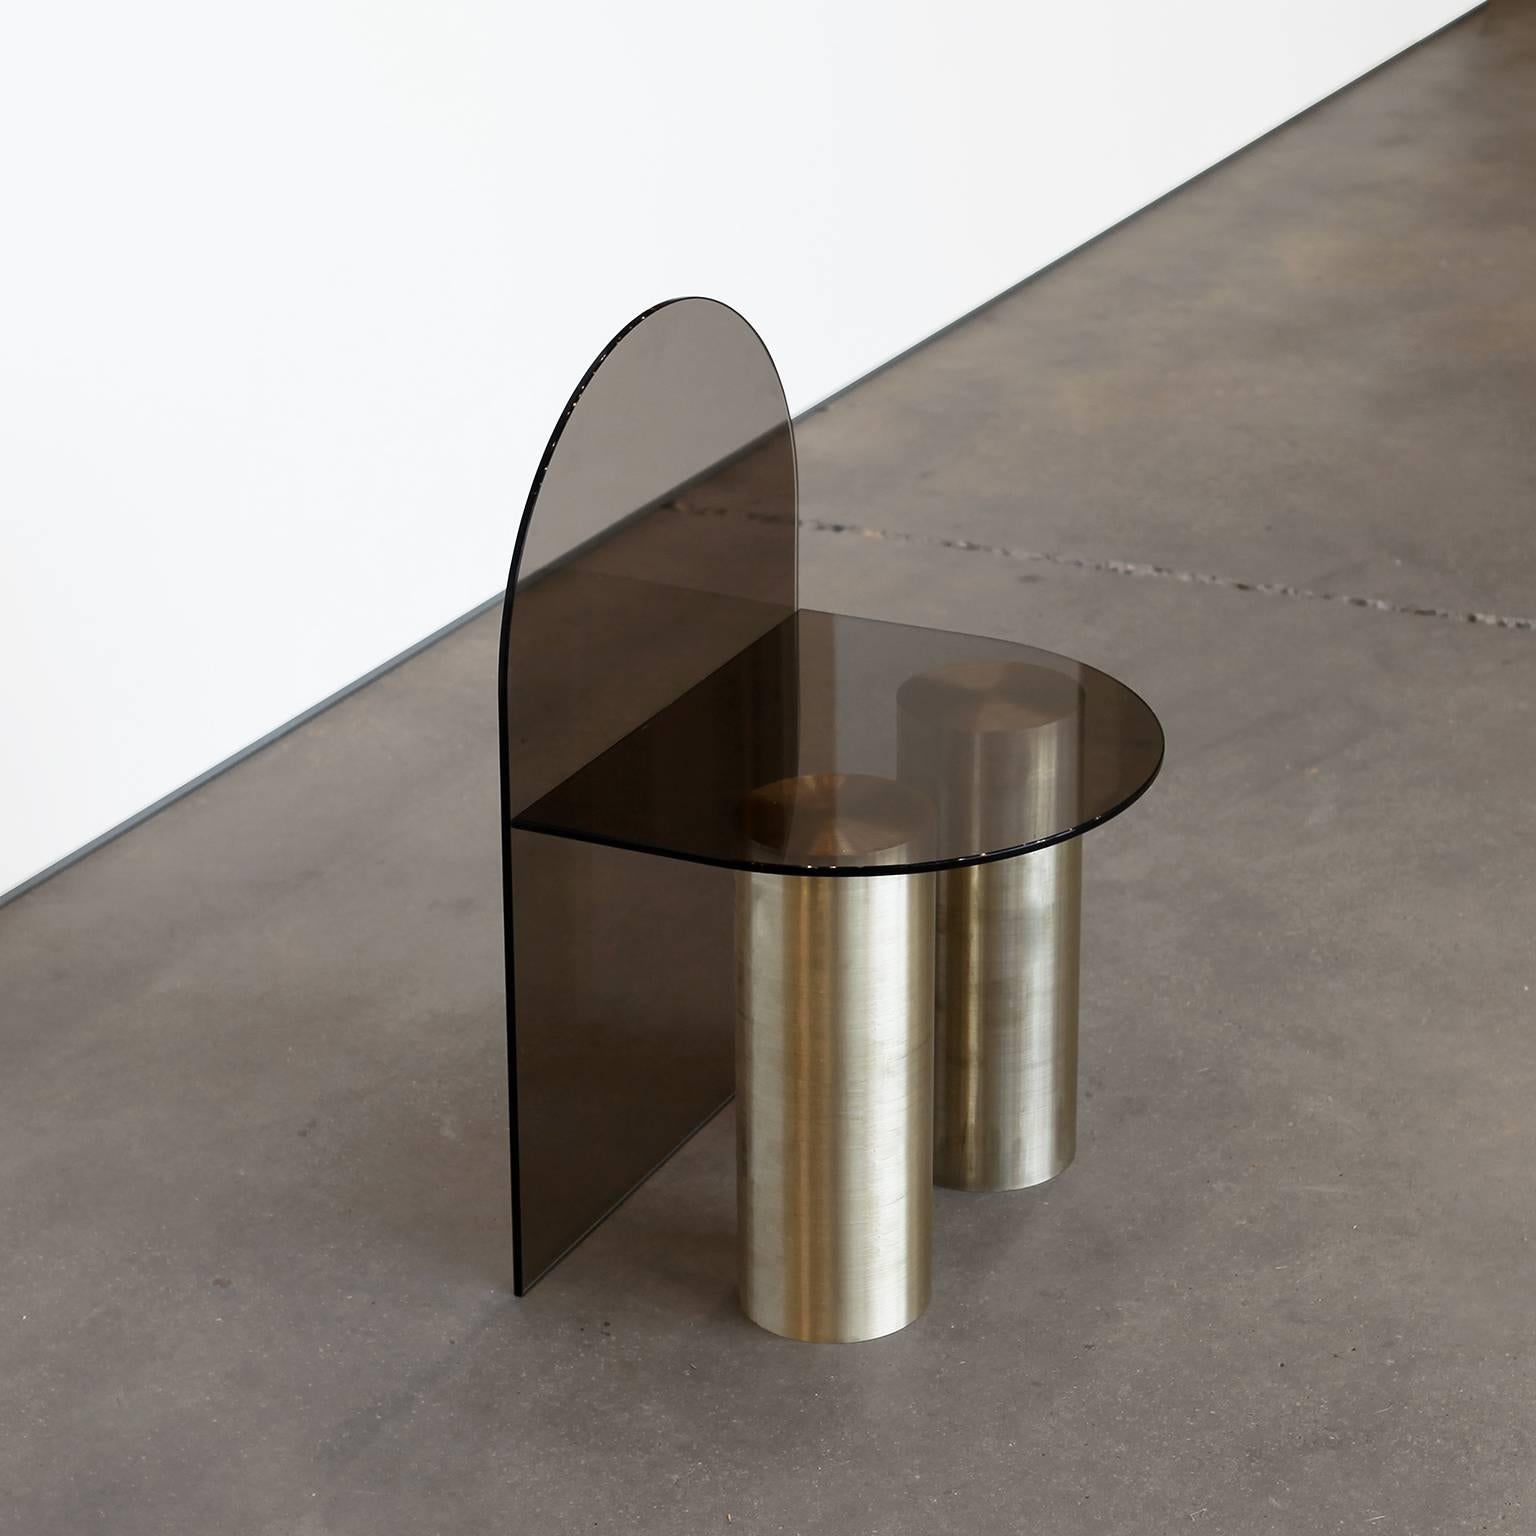 Brushed 21st Century Minimalist Solid Brass and Glass, Low Seat For Sale